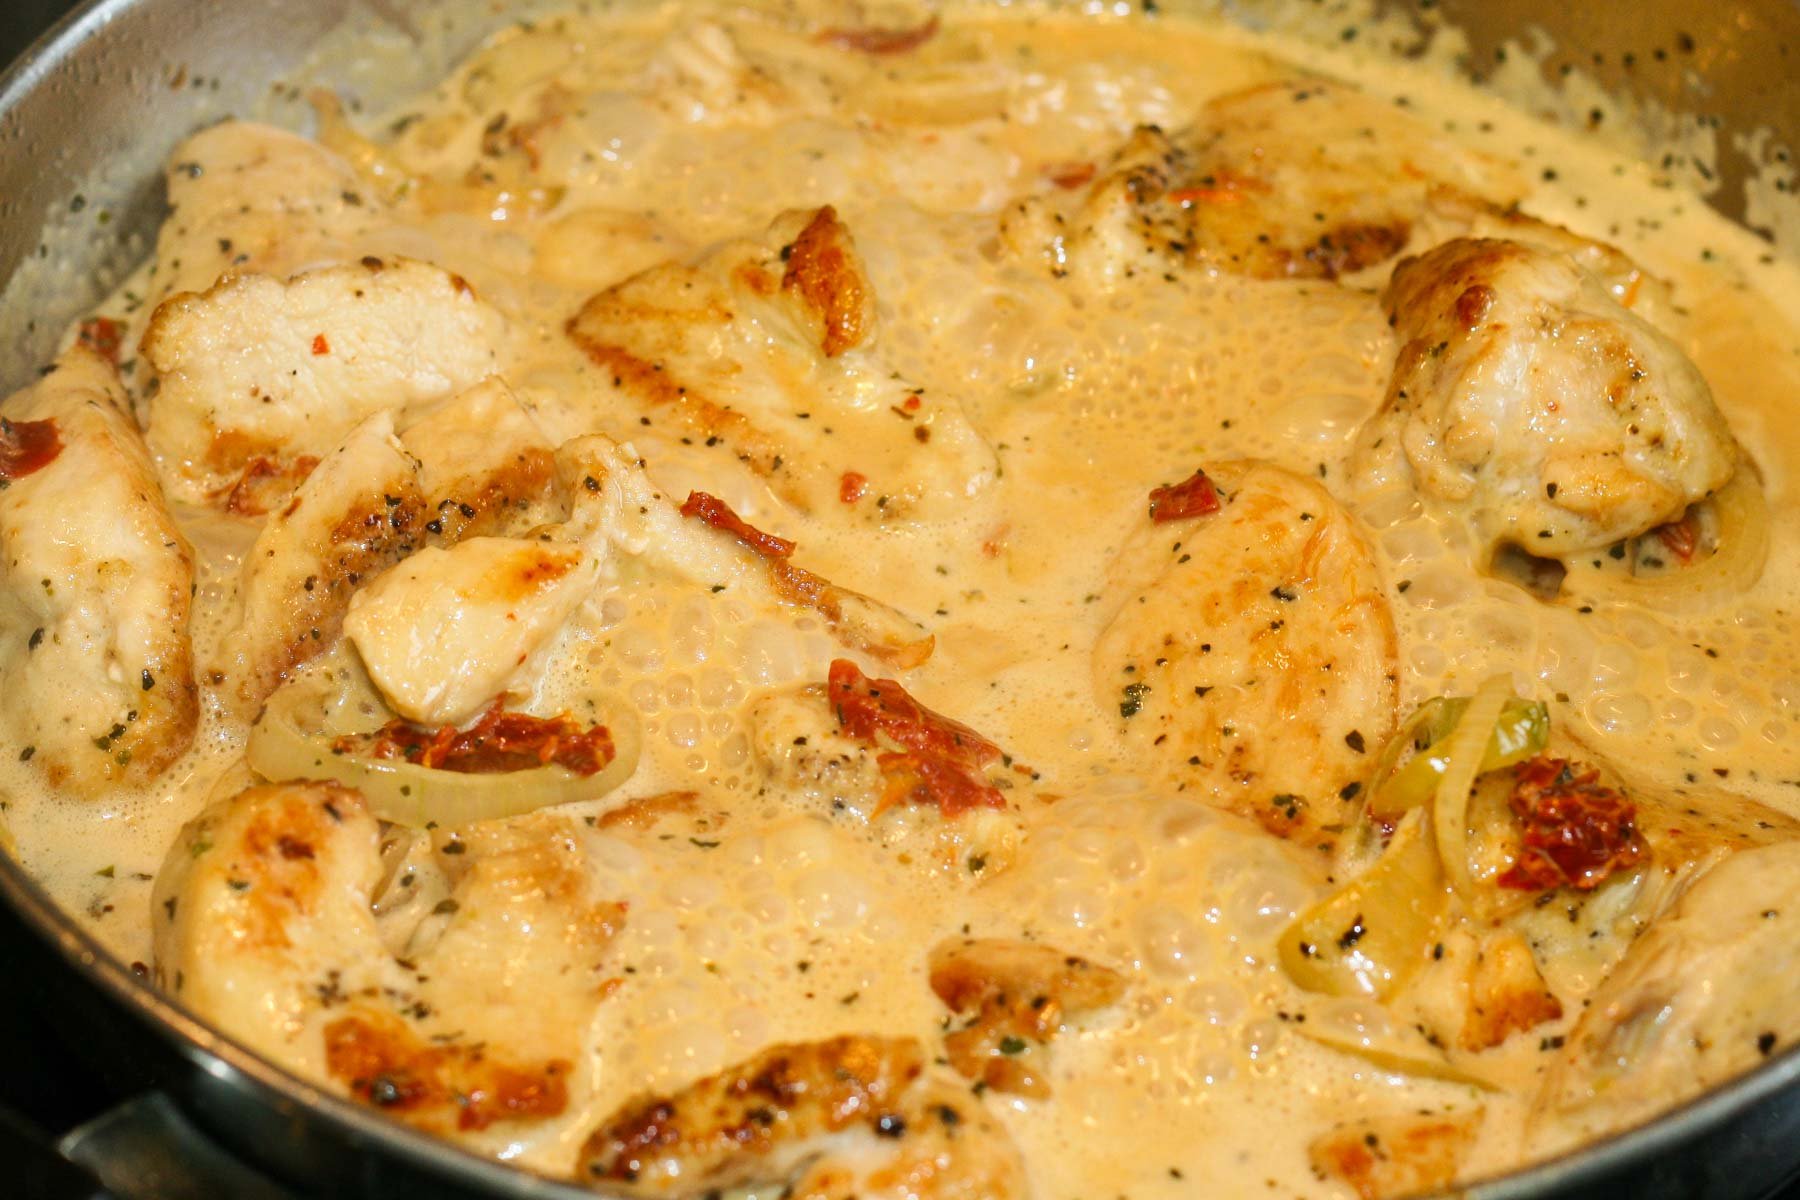 Chicken with shallots and sun-dried tomatoes in a creamy sauce simmering in a stainless steel frying pan.